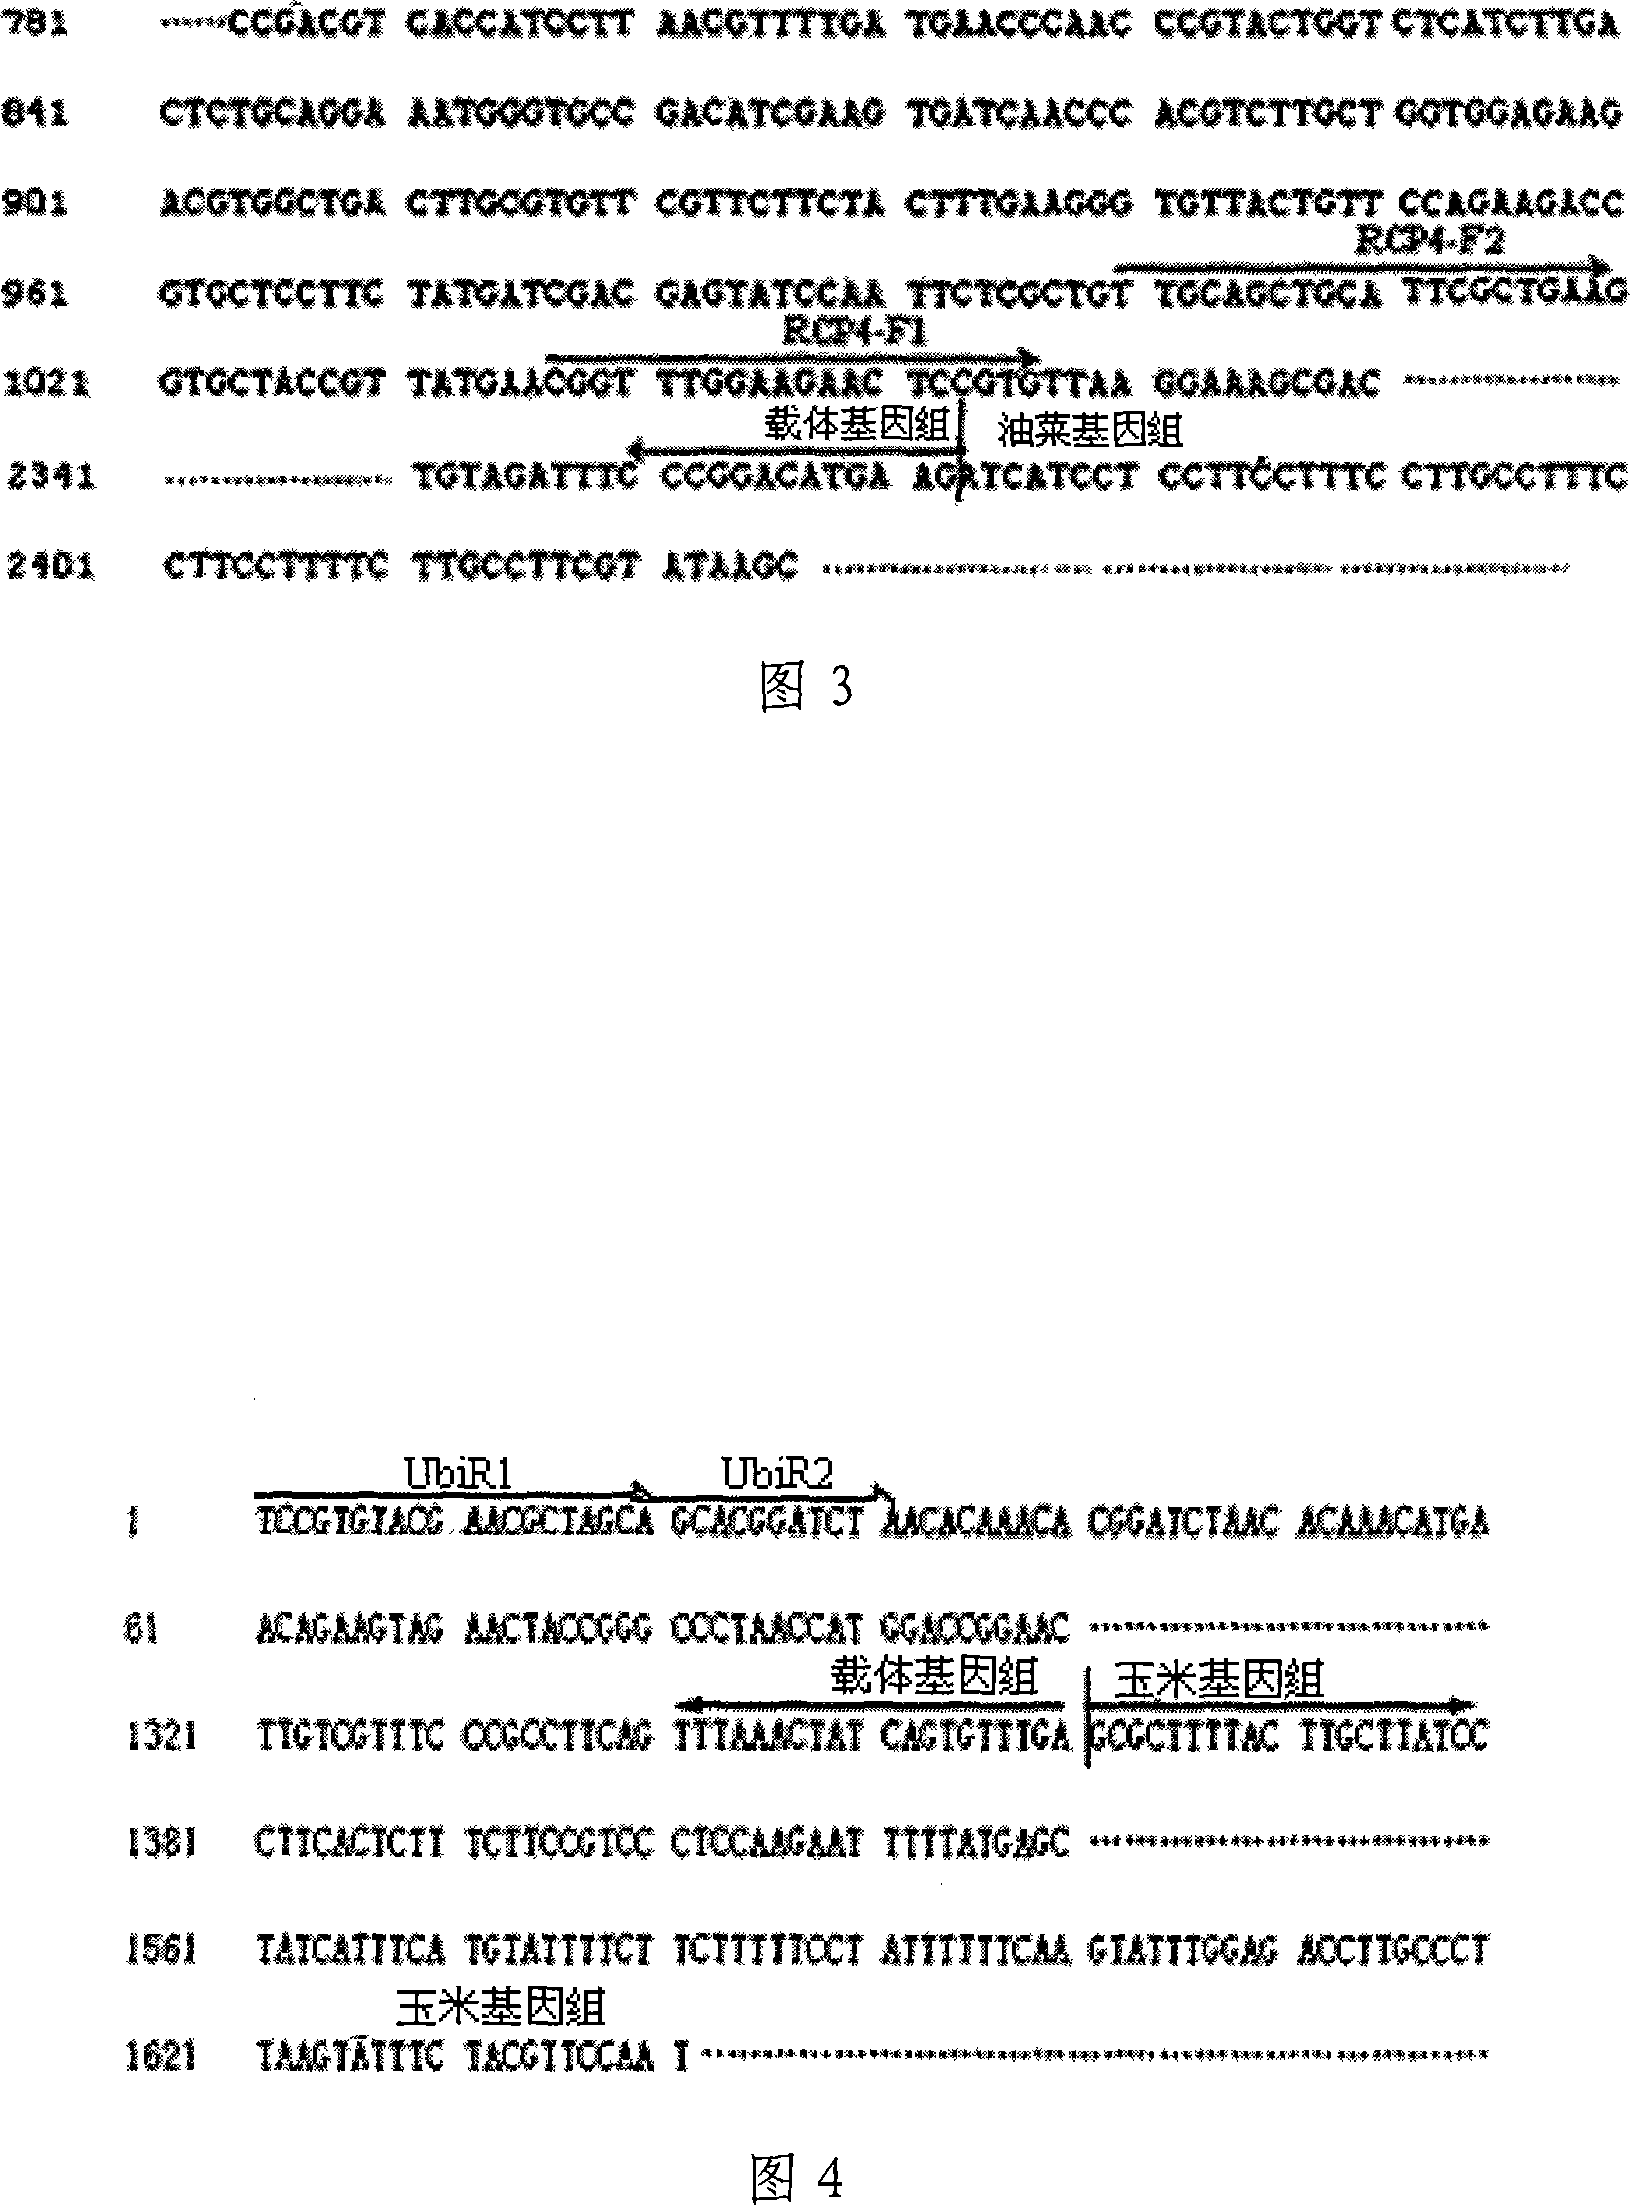 Connection fragment PCR detecting method for appraising unknown gene sequence